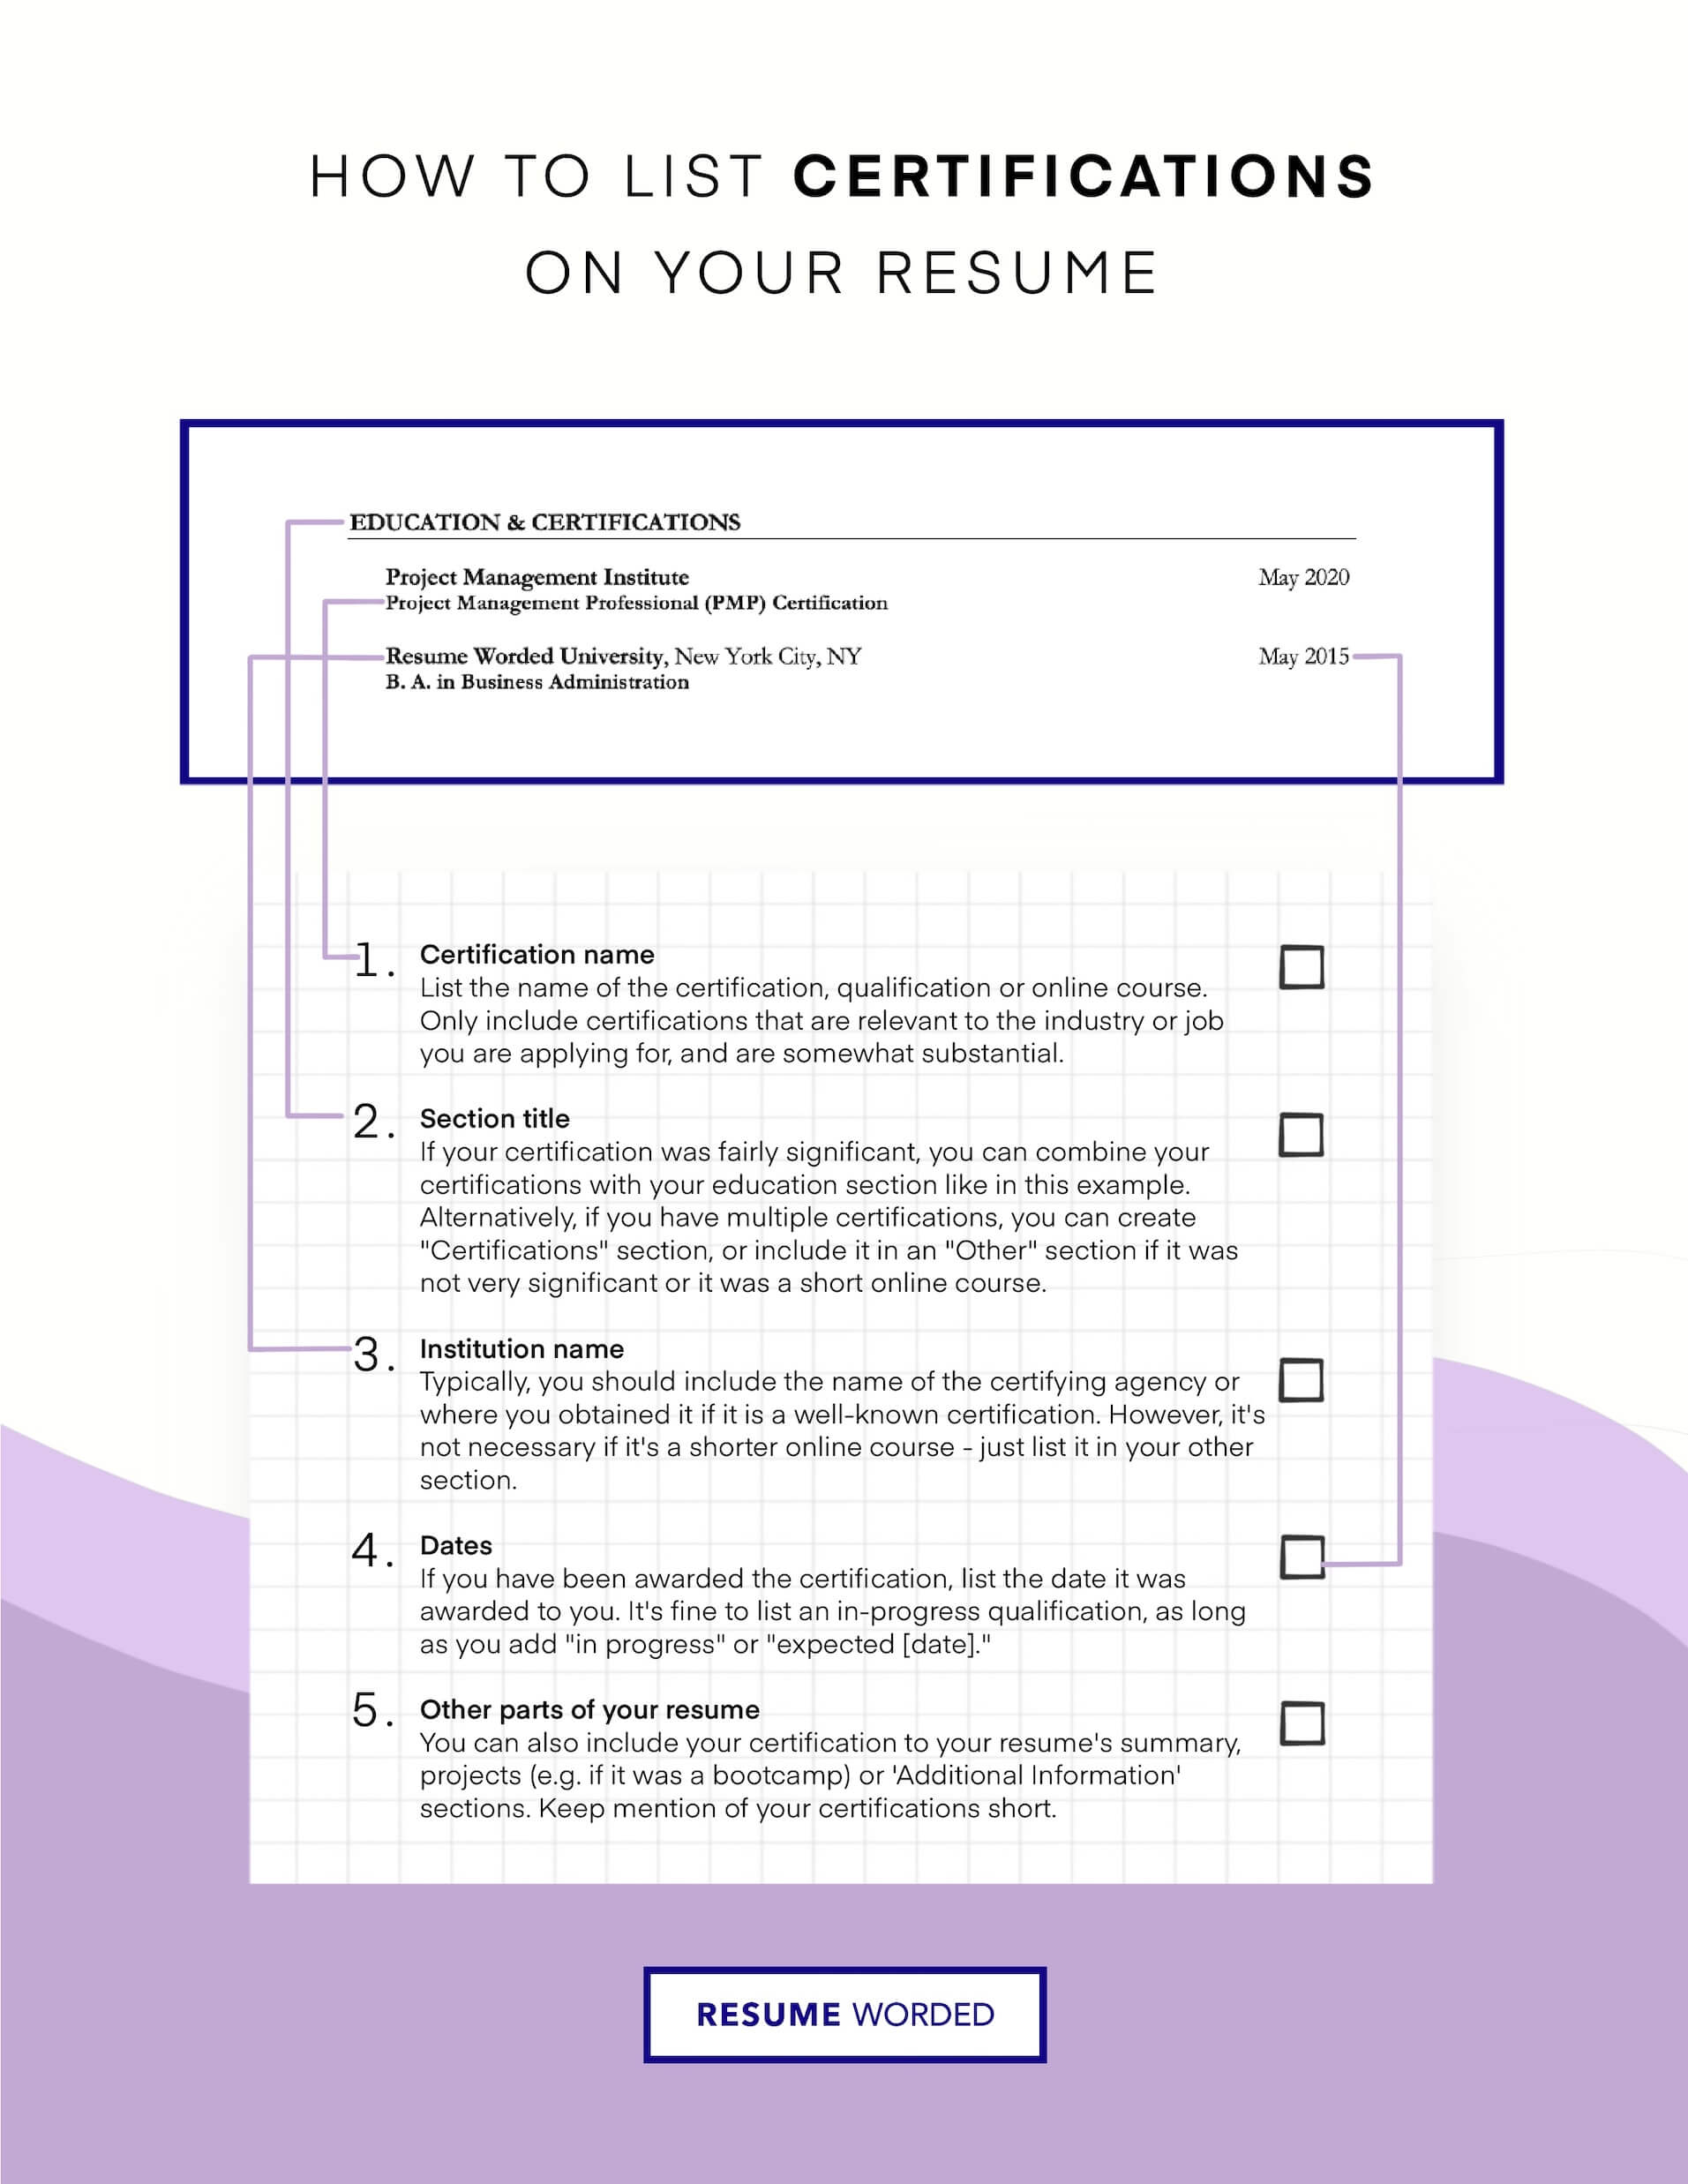 Gain certification to give you an edge. - Retail Customer Service Rep Resume